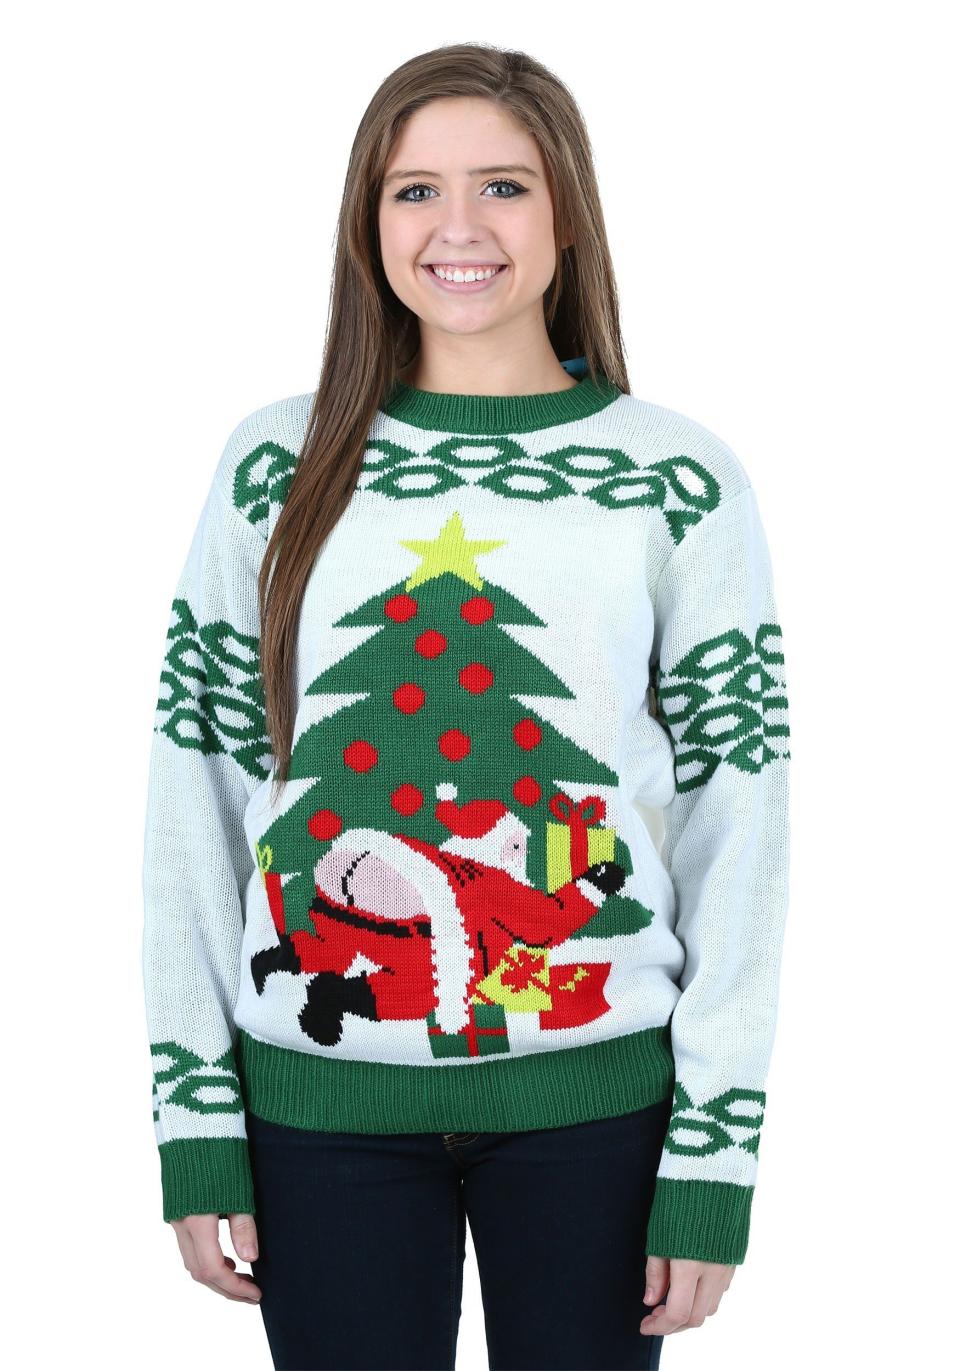 Santa is known for his snowy beard, twinkly eyes and -- I was going to say rosy cheeks. However, after looking at this <a href="https://www.fun.com/butt-crack-santa-ugly-christmas-sweater.html" target="_blank">sweater,</a> those cheeks look more like a pasty white.<a href="https://www.fun.com/butt-crack-santa-ugly-christmas-sweater.html"><br /><br /></a>